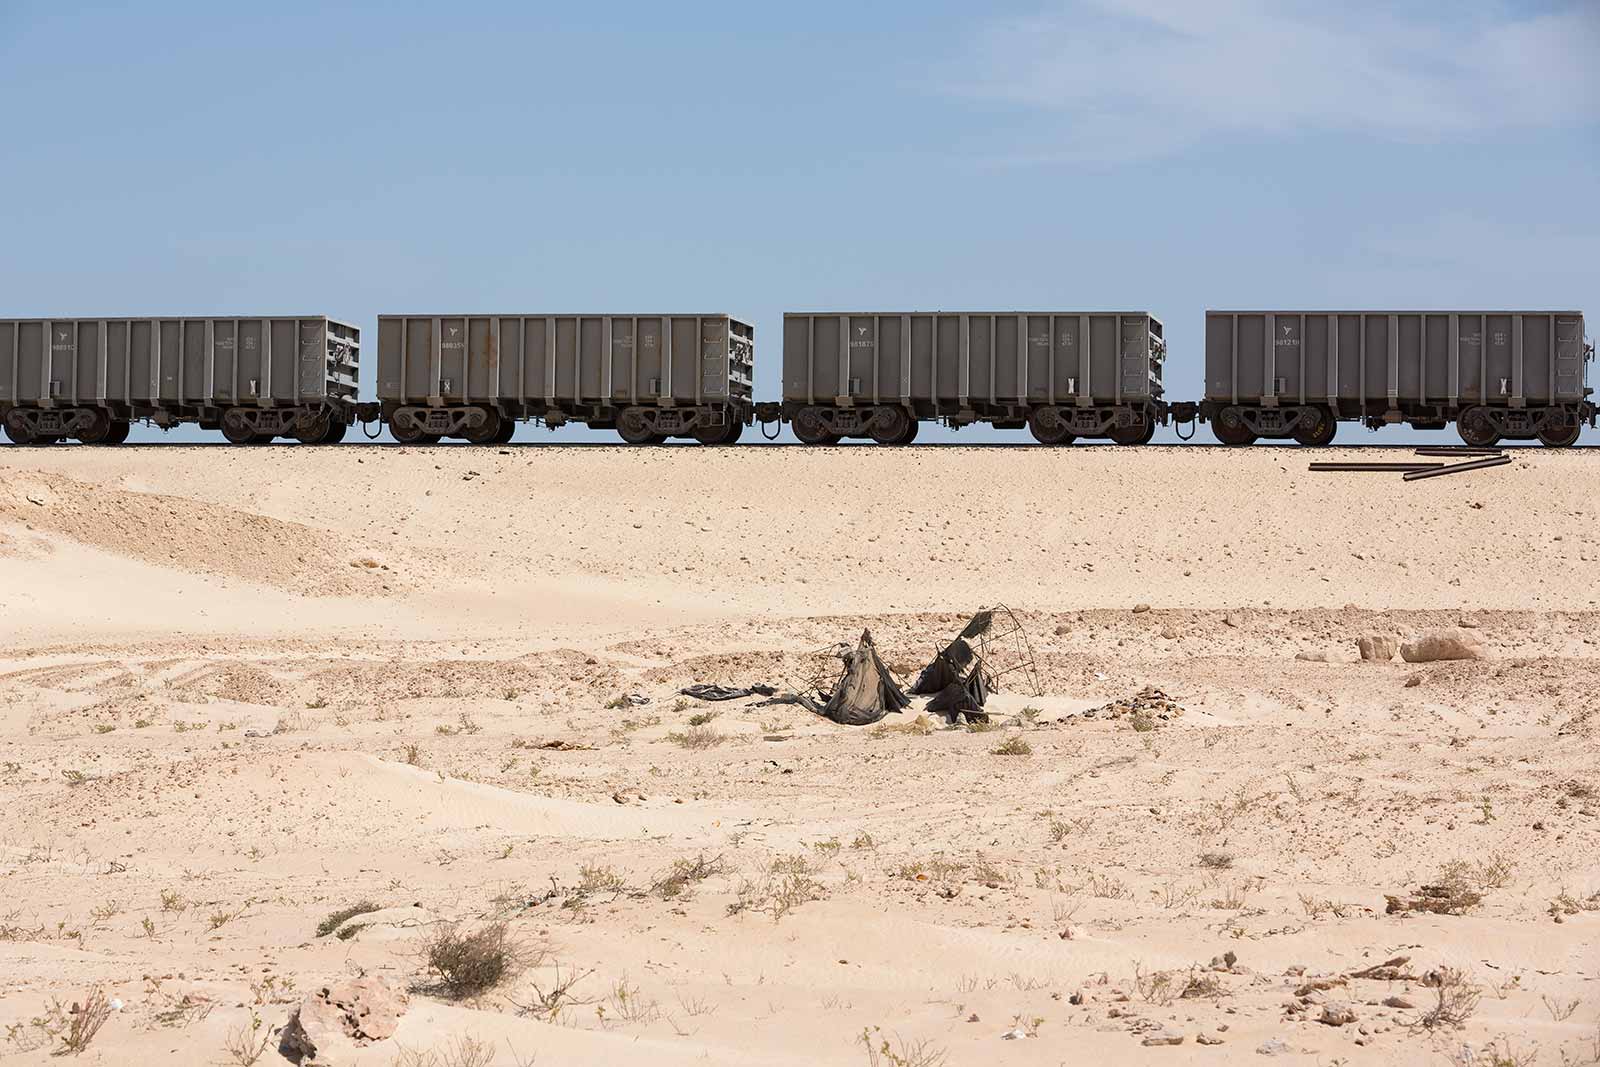 The Mauritanian Railways opened in 1963. It consists of a single, 704 km railway line linking the iron mining centre of Zouérat with the port of Nouadhibou.